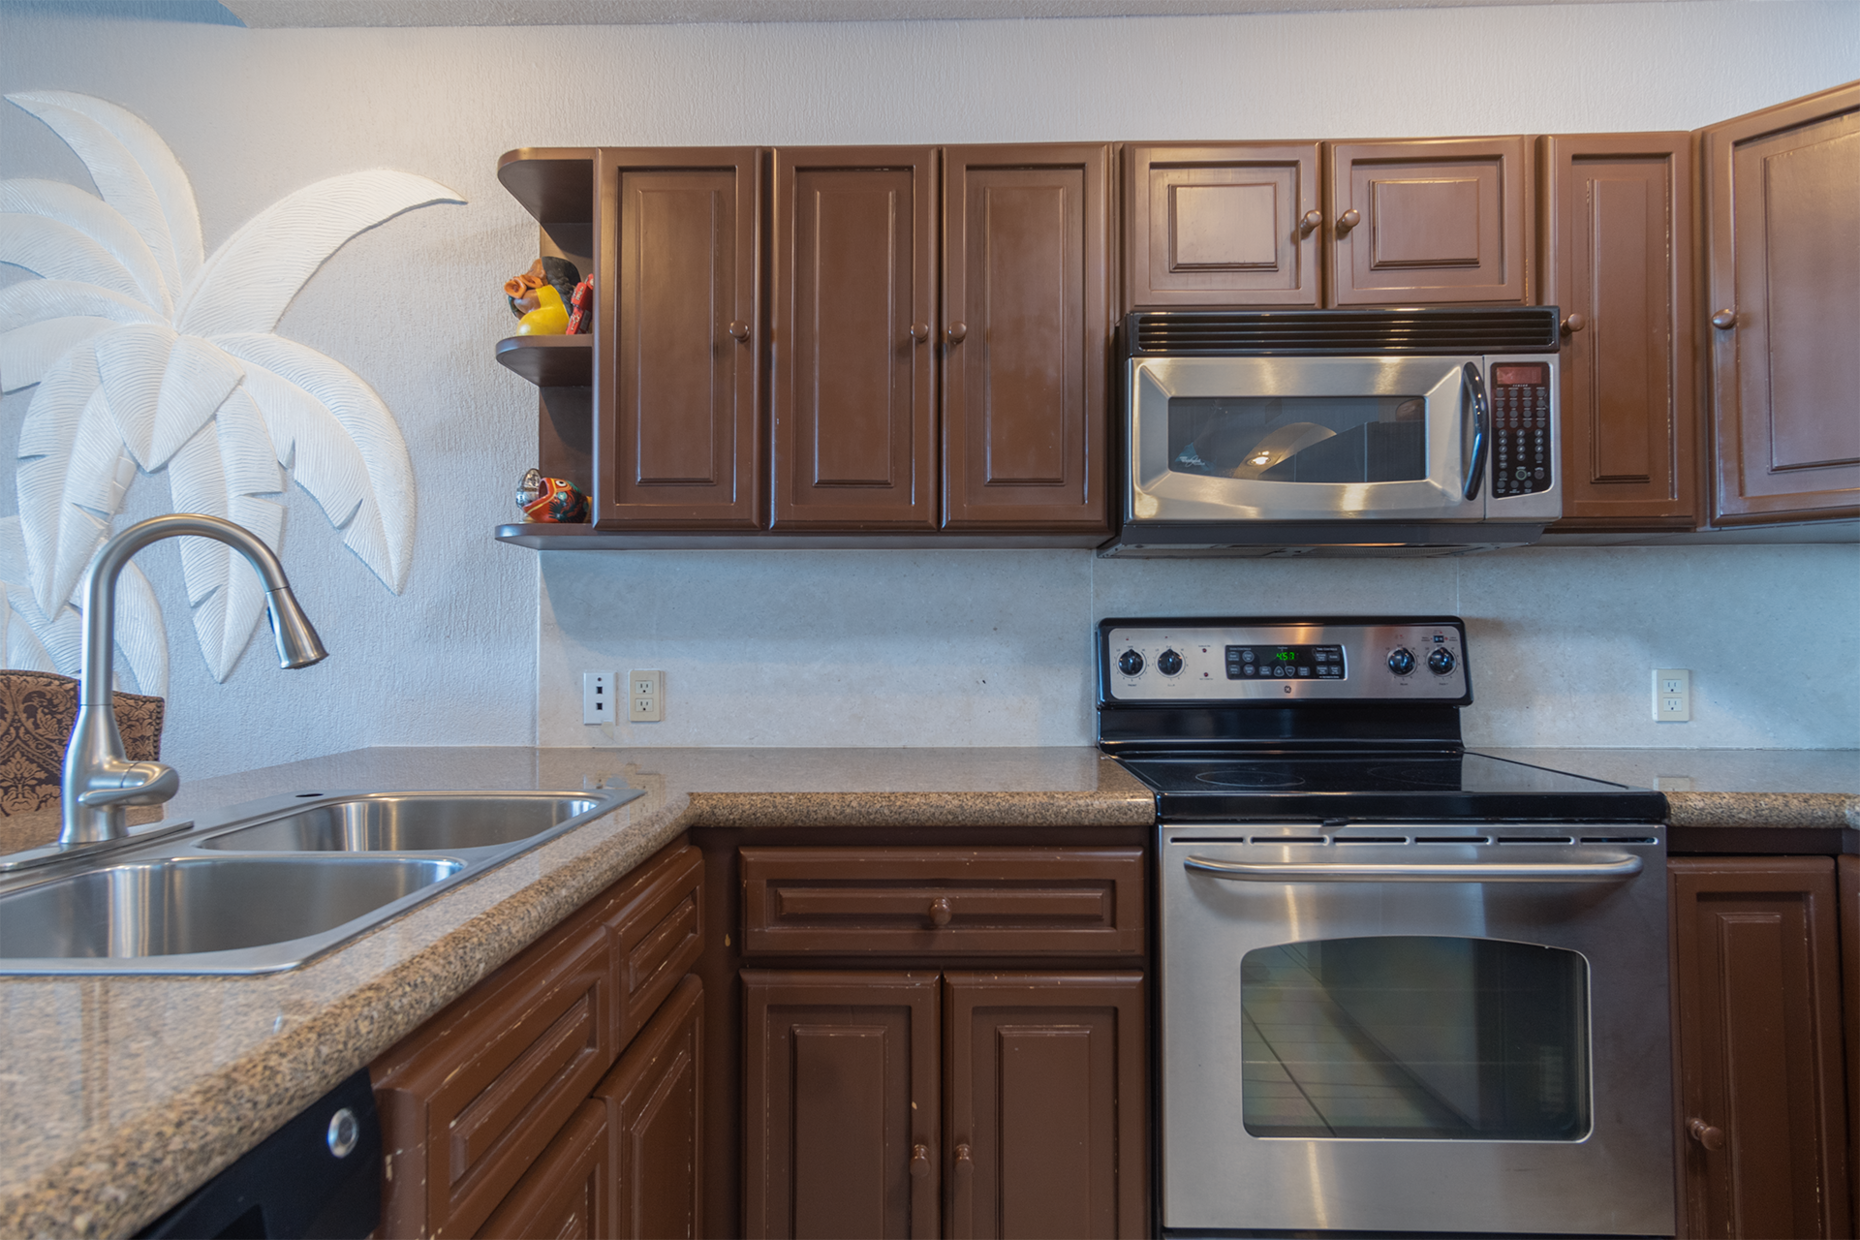 The kitchen is complete with all appliances, and more.